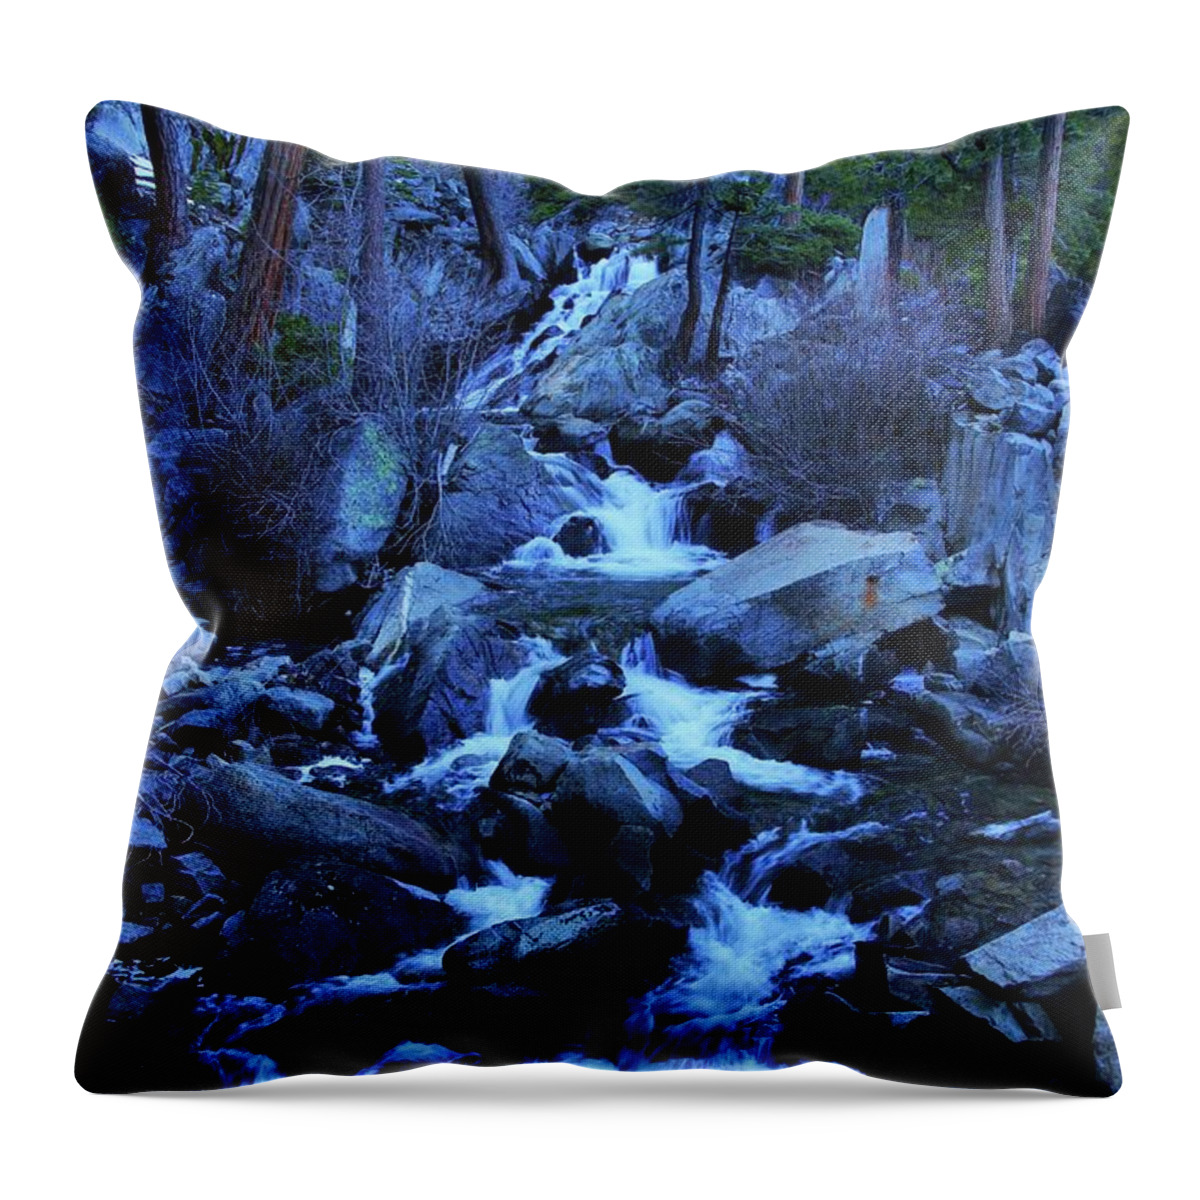 Waterfall Throw Pillow featuring the photograph Eagle Falls Portrait by Sean Sarsfield